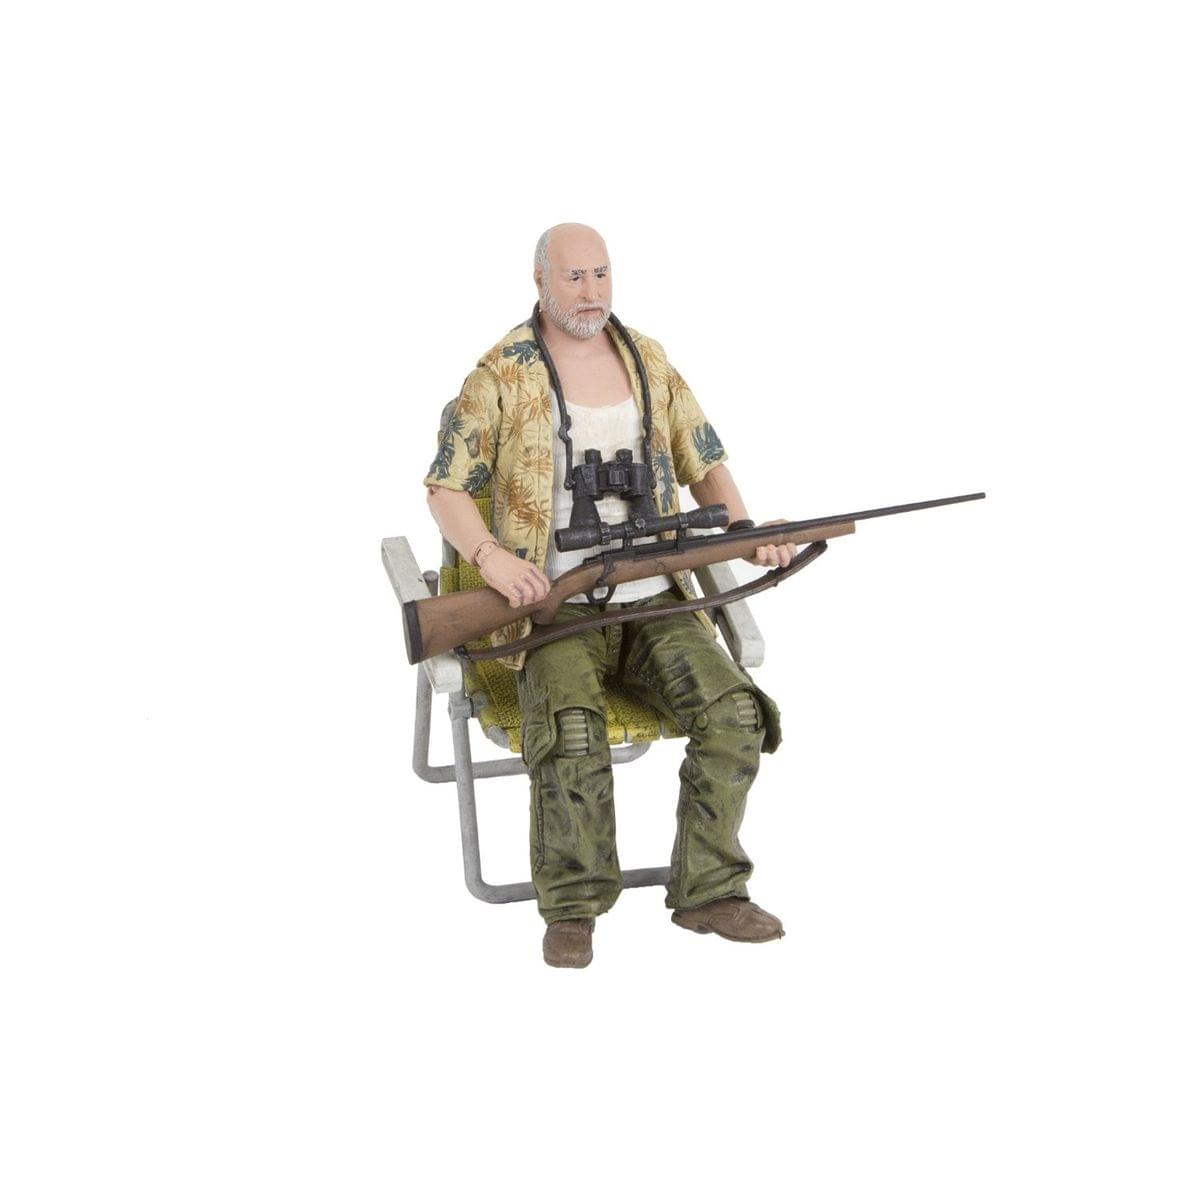 The Walking Dead 6" TV Series 8 Action Figure: Dale Horvath